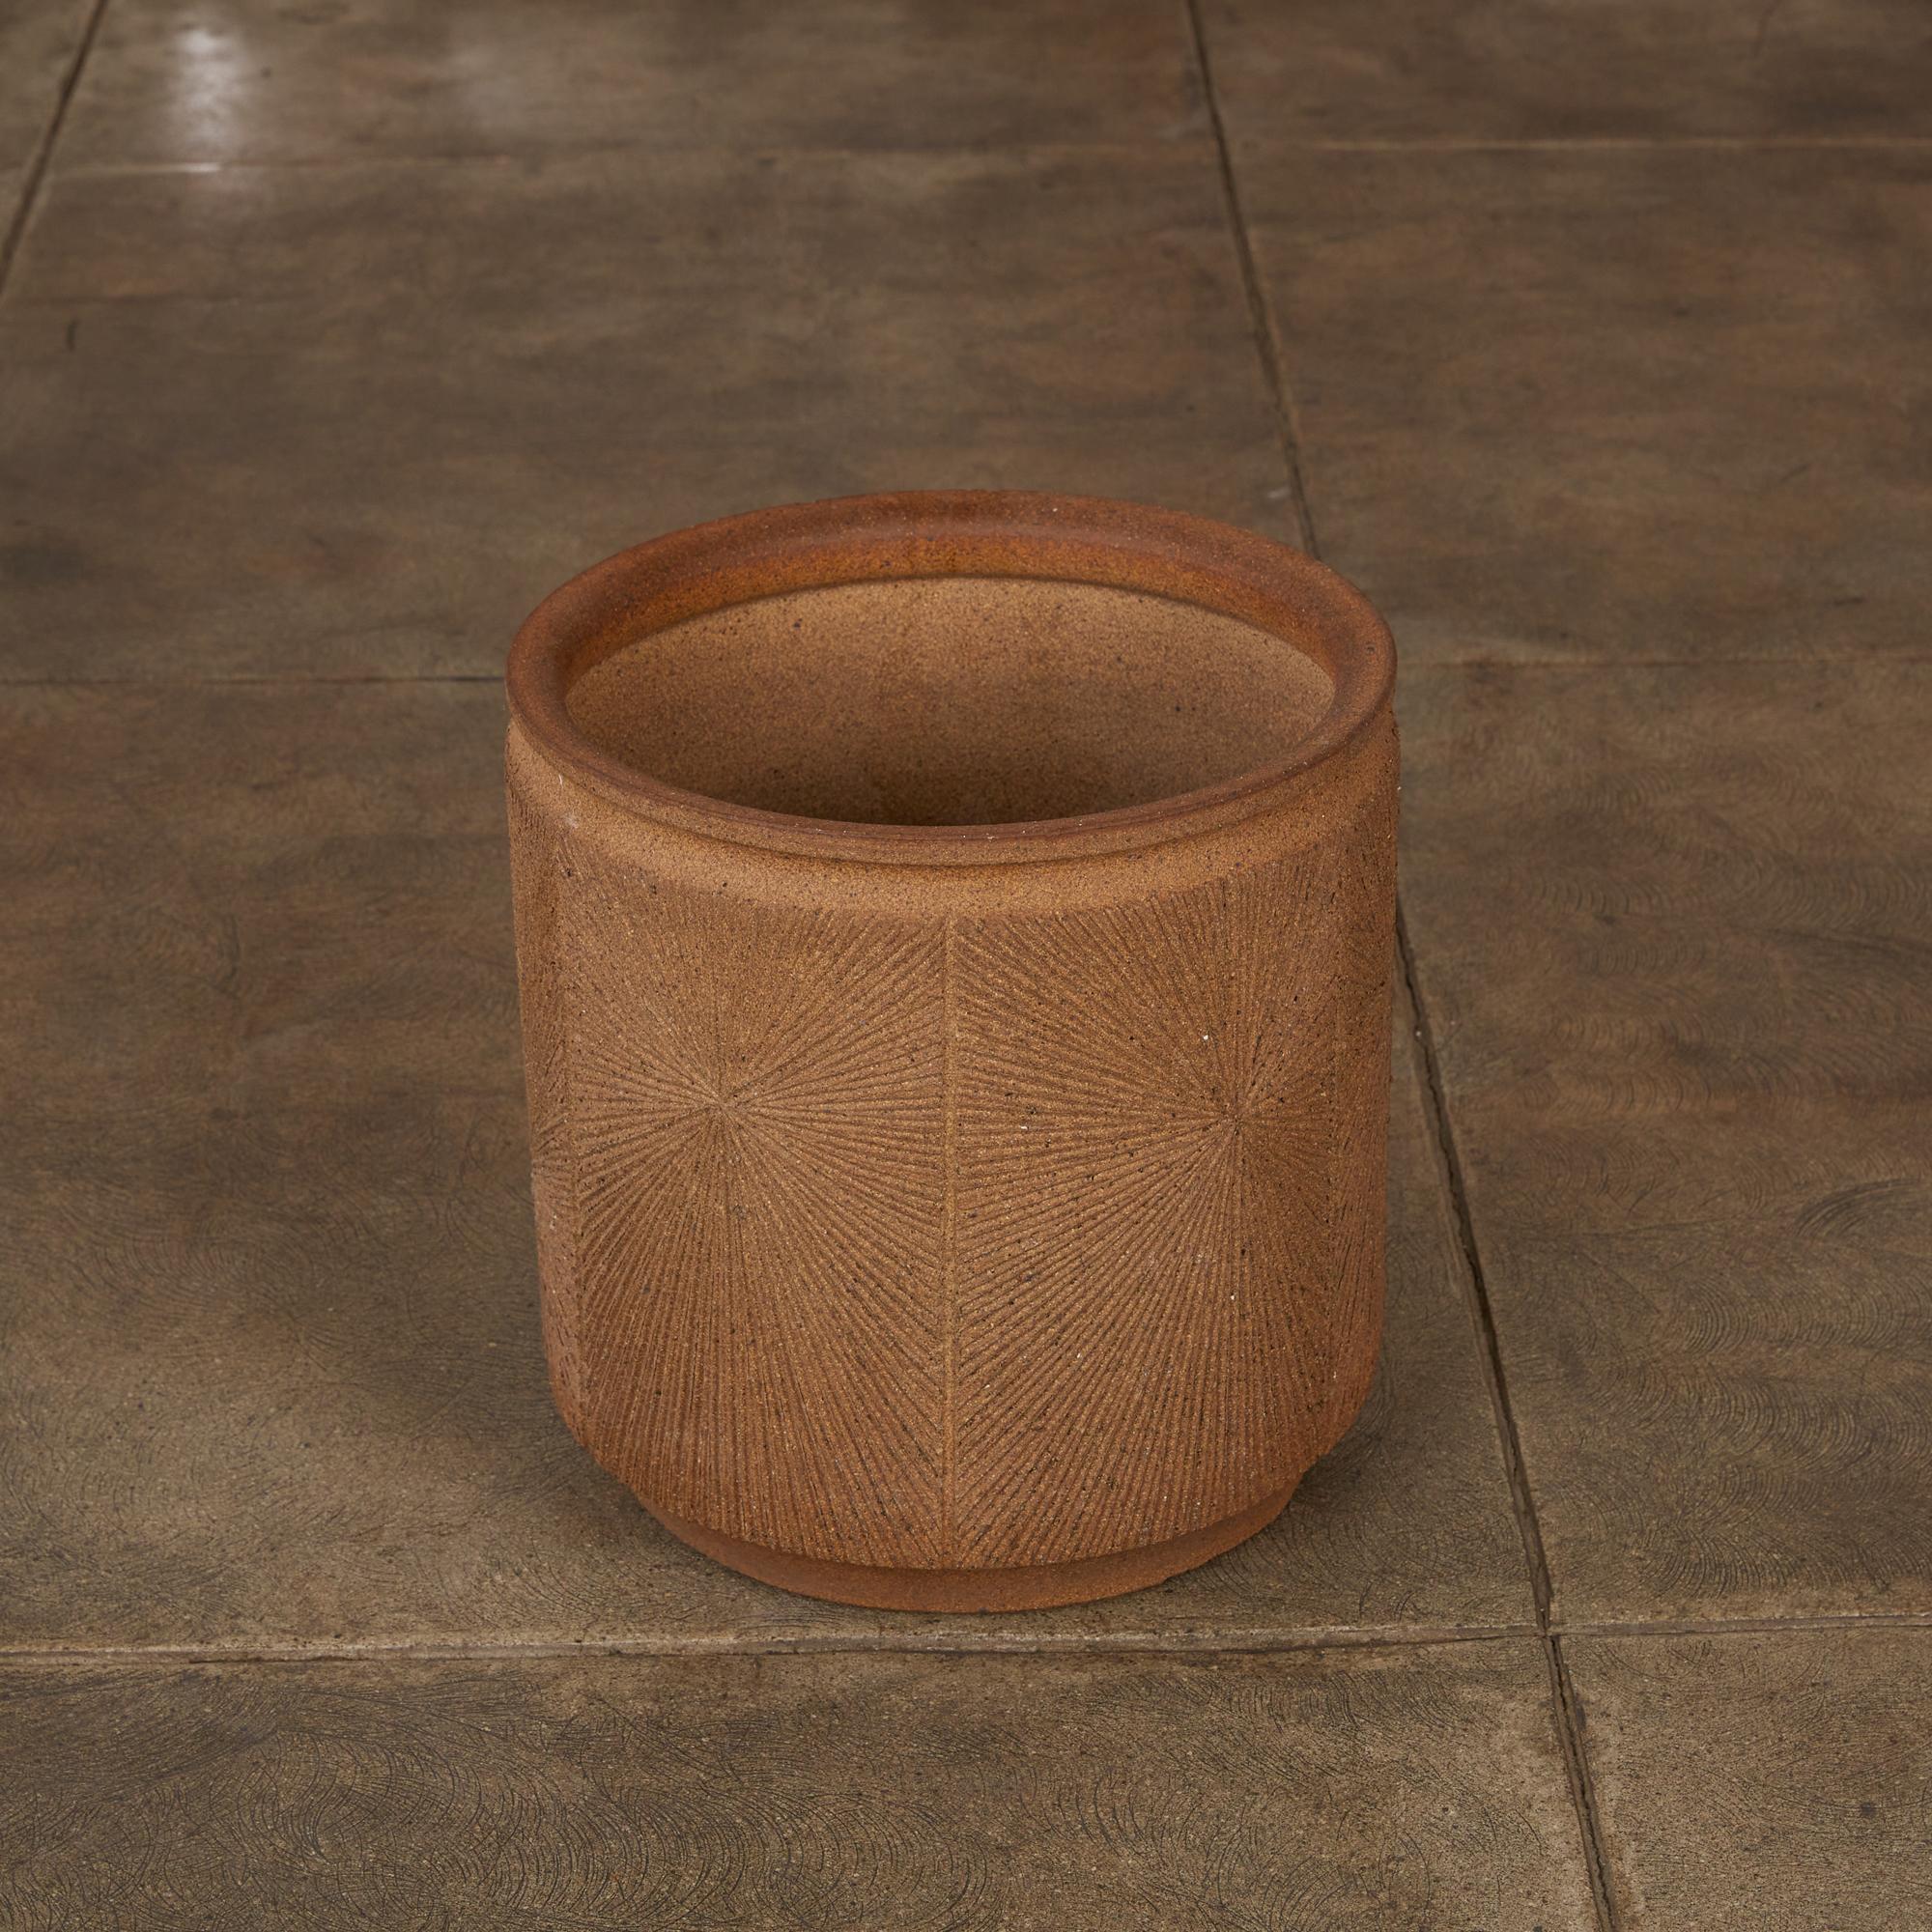 A cylindrical stoneware planter from Robert Maxwell and David Cressey's 1970s collaboration Earthgender. The planter has a rounded lip and an incised all-over sunburst pattern. The interior is unglazed and slightly speckled.

Dimensions: 15